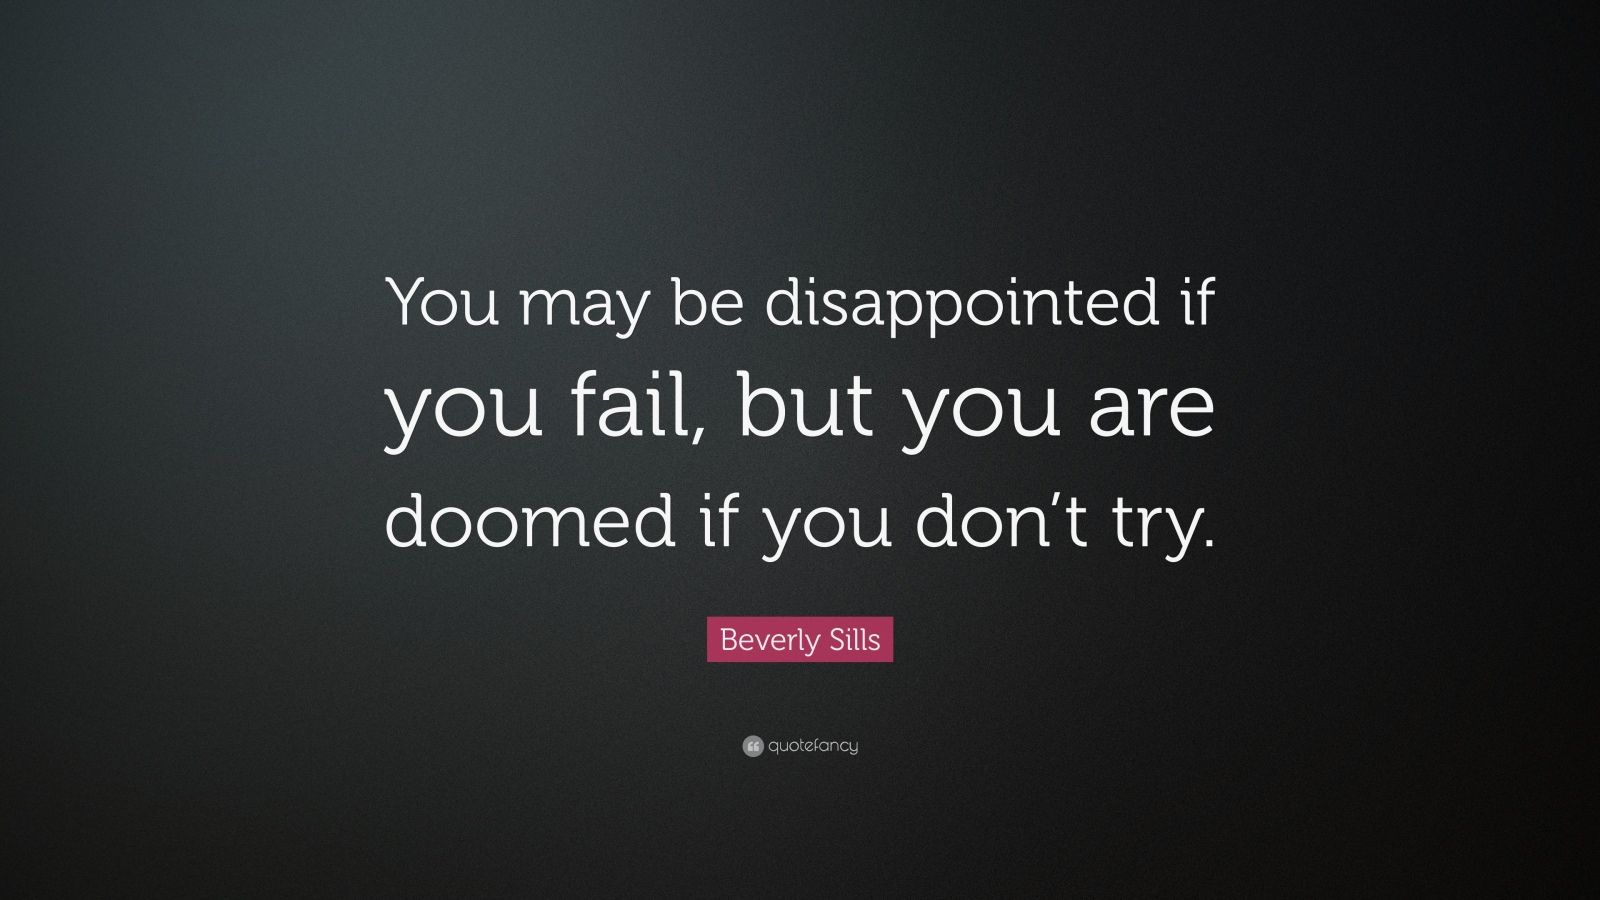 Beverly Sills Quote: “You may be disappointed if you fail, but you are ...